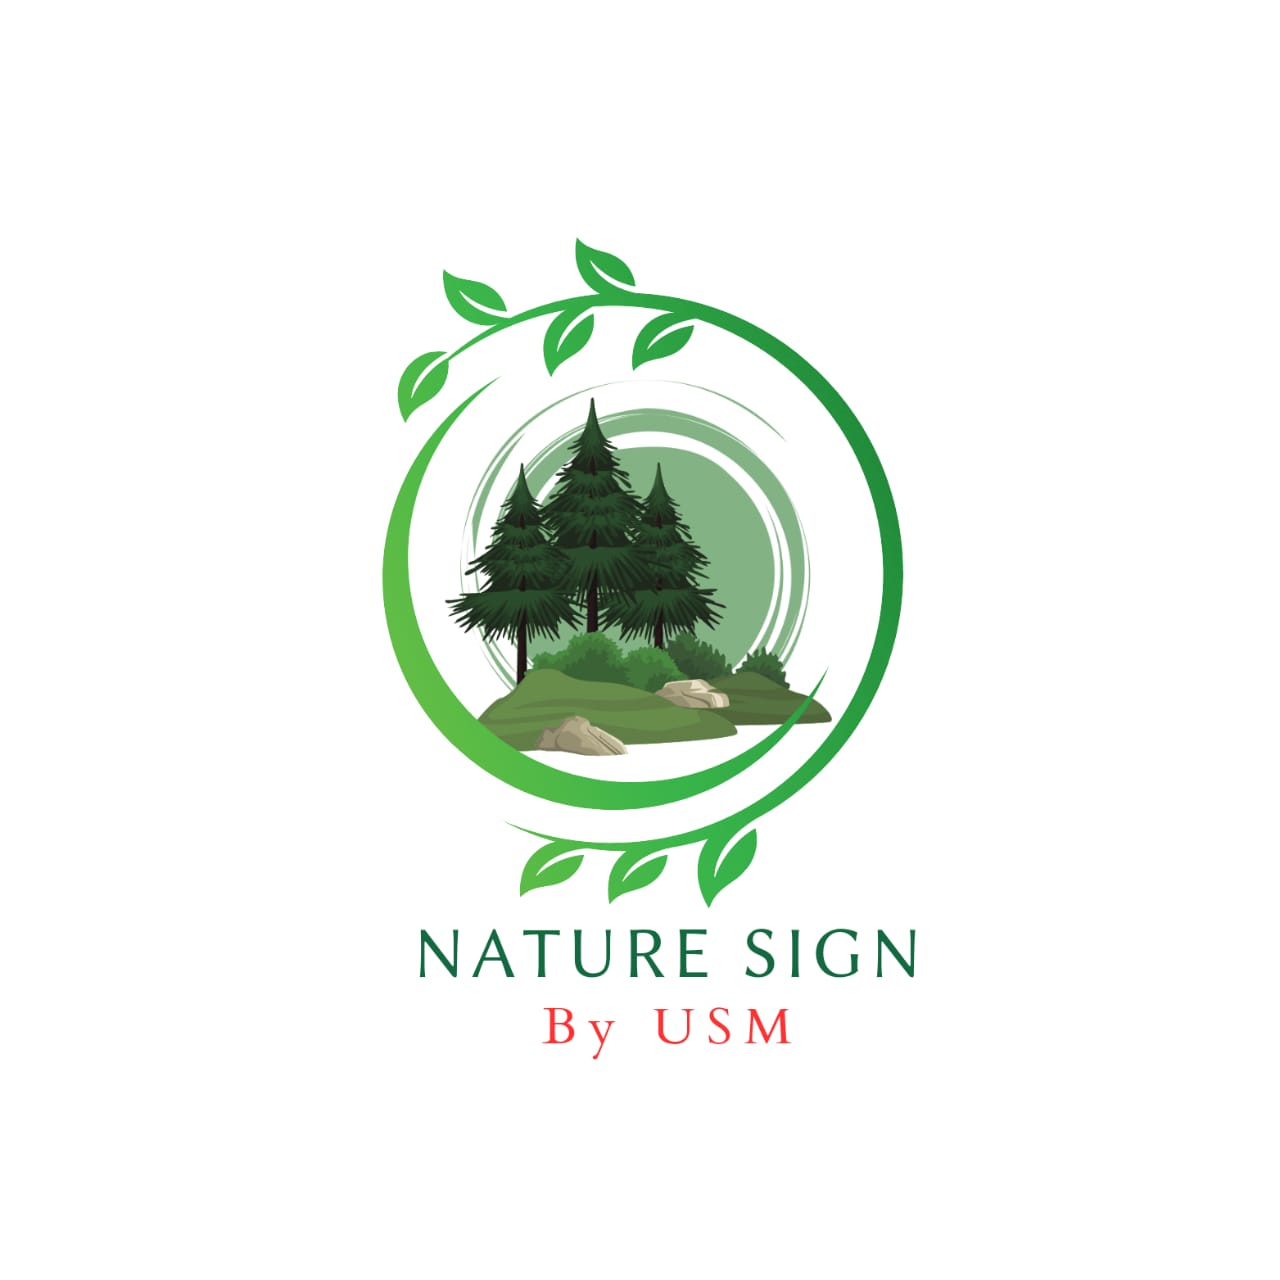 Logo for a natural sign by usm.